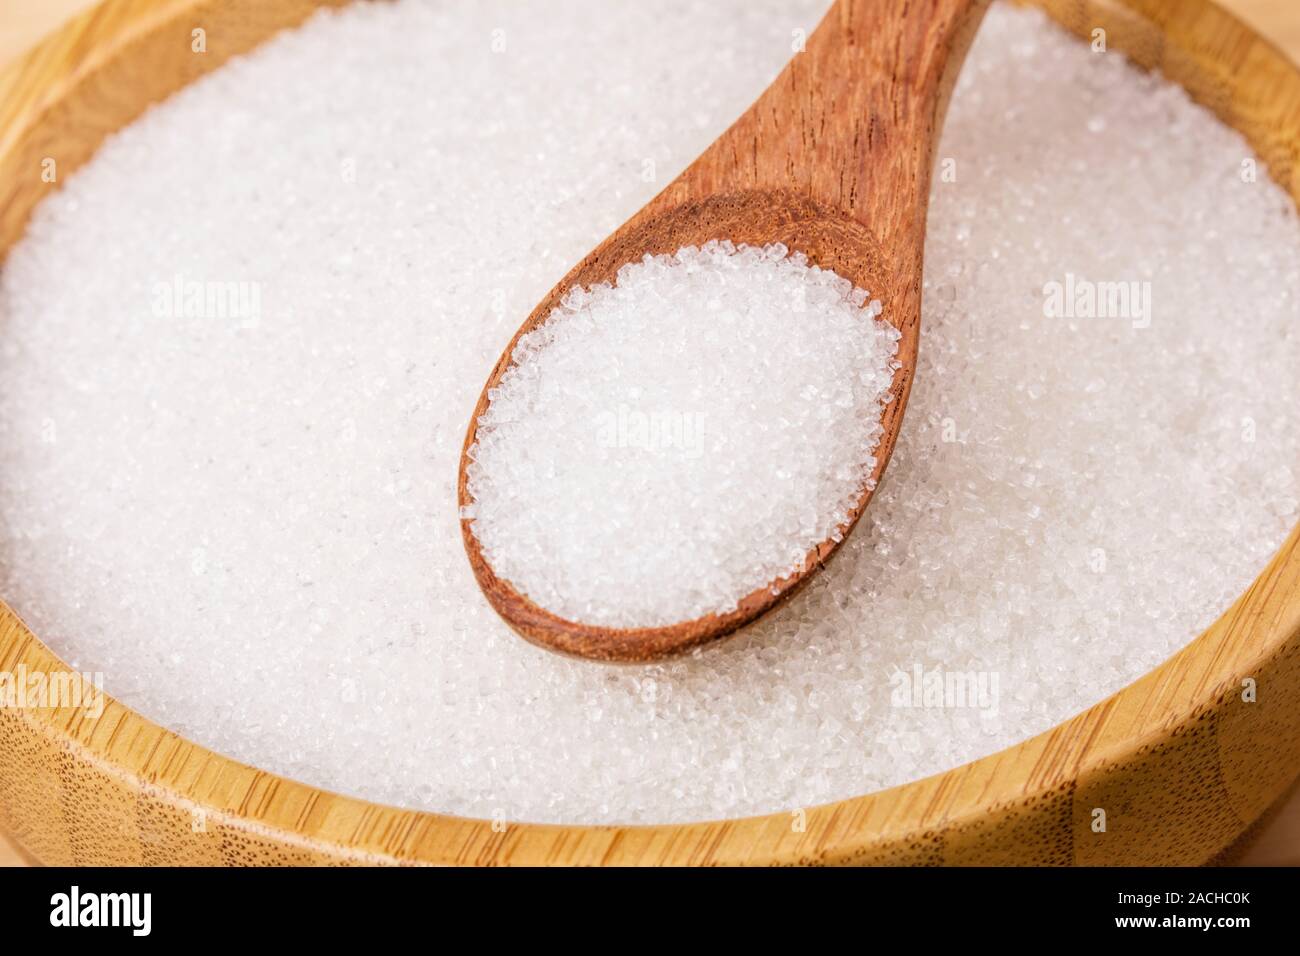 Wooden bowl full of granulated sugar with a wooden spoon on a wooden background Stock Photo